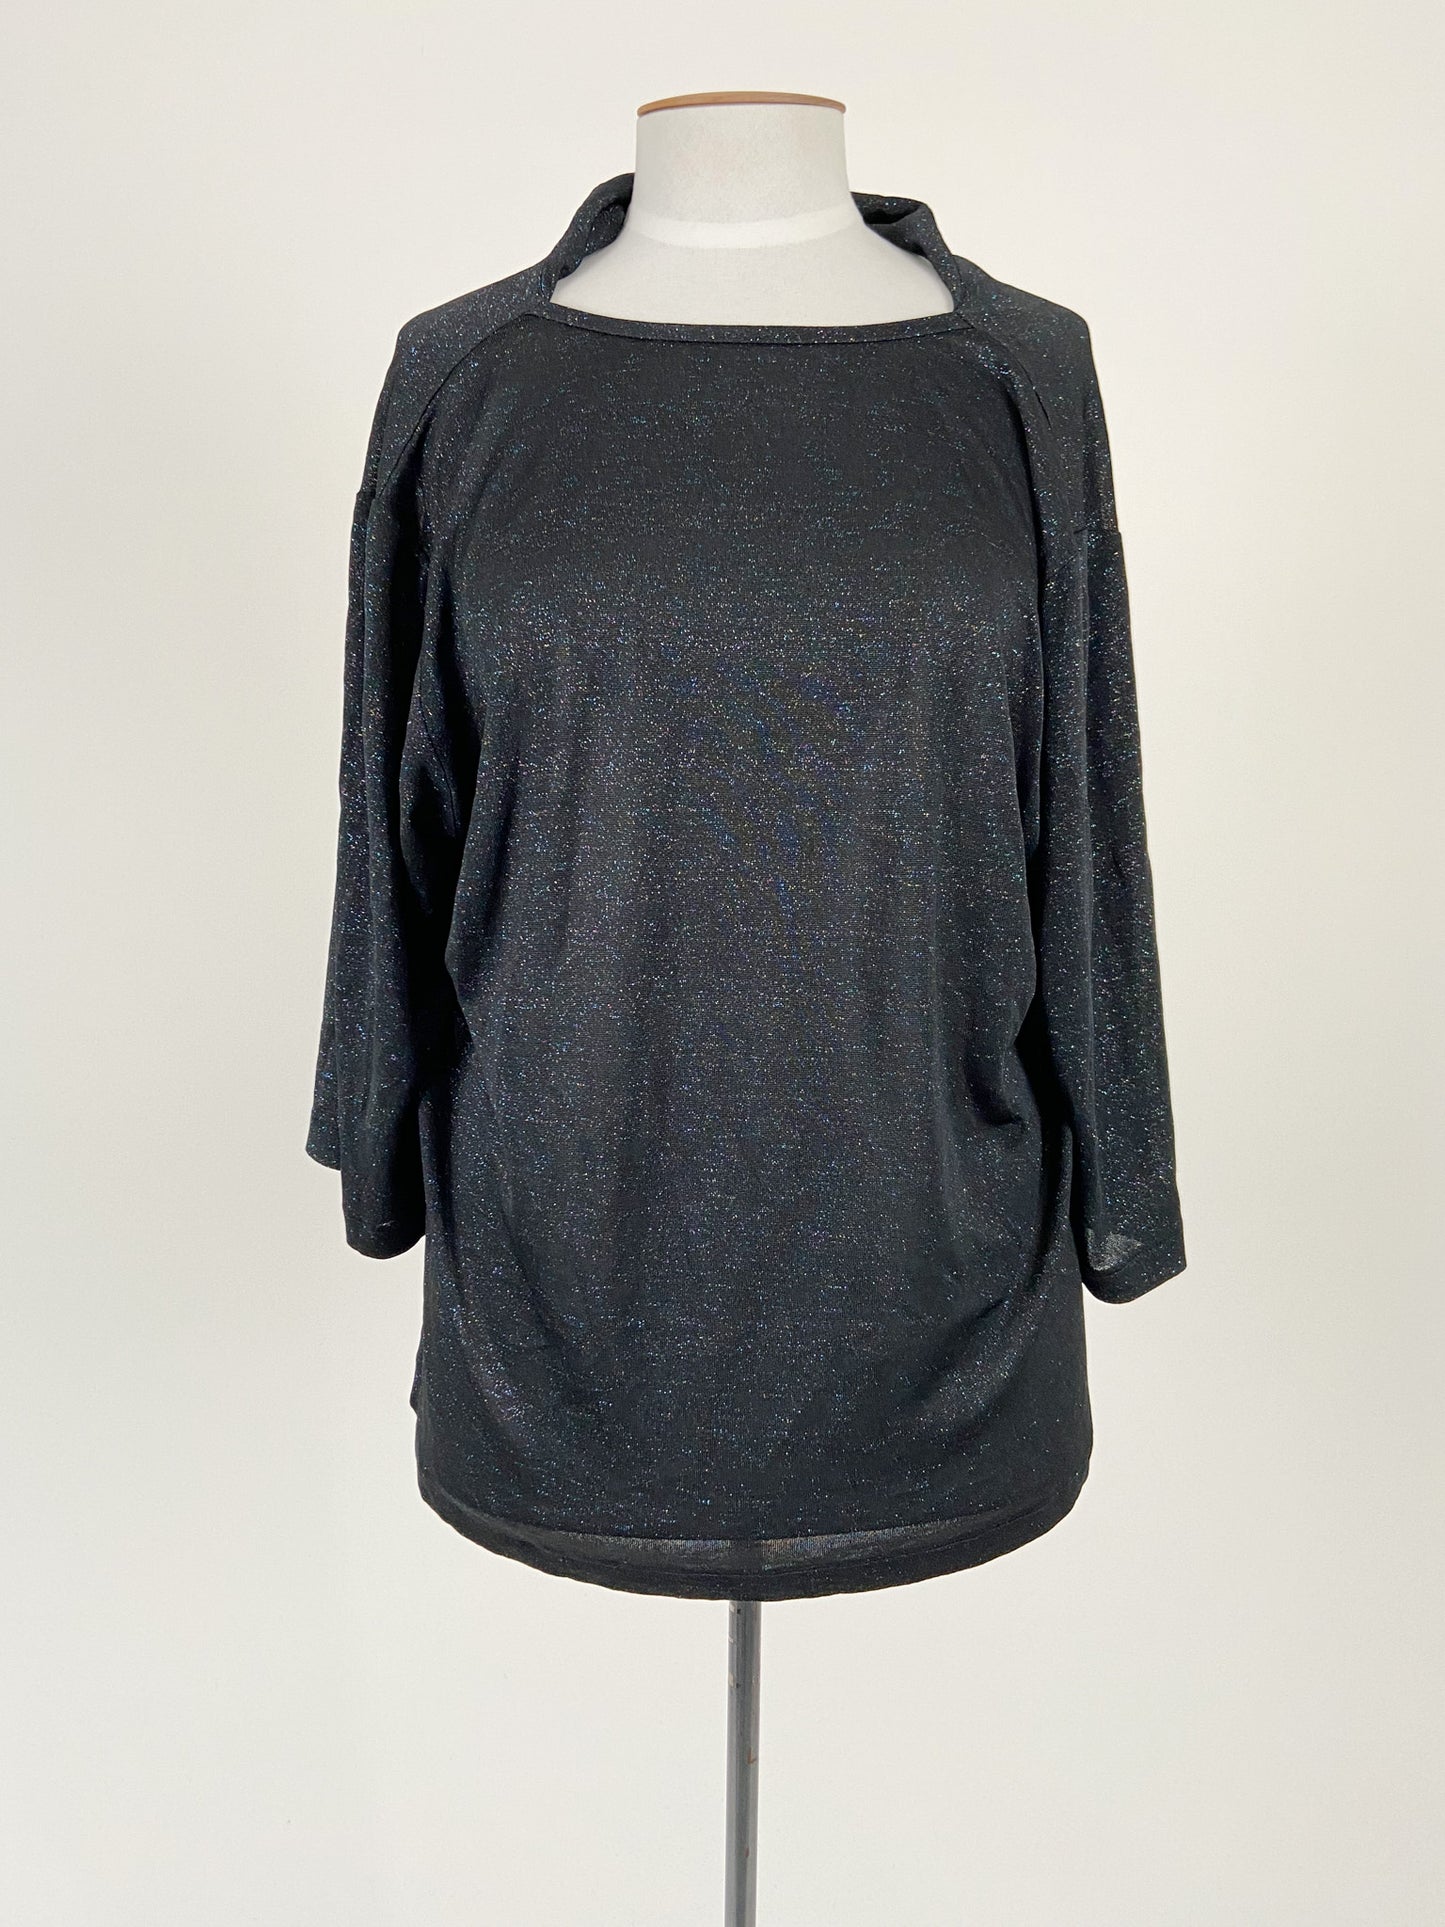 Unknown Brand | Navy Casual/Cocktail Top | Size XL